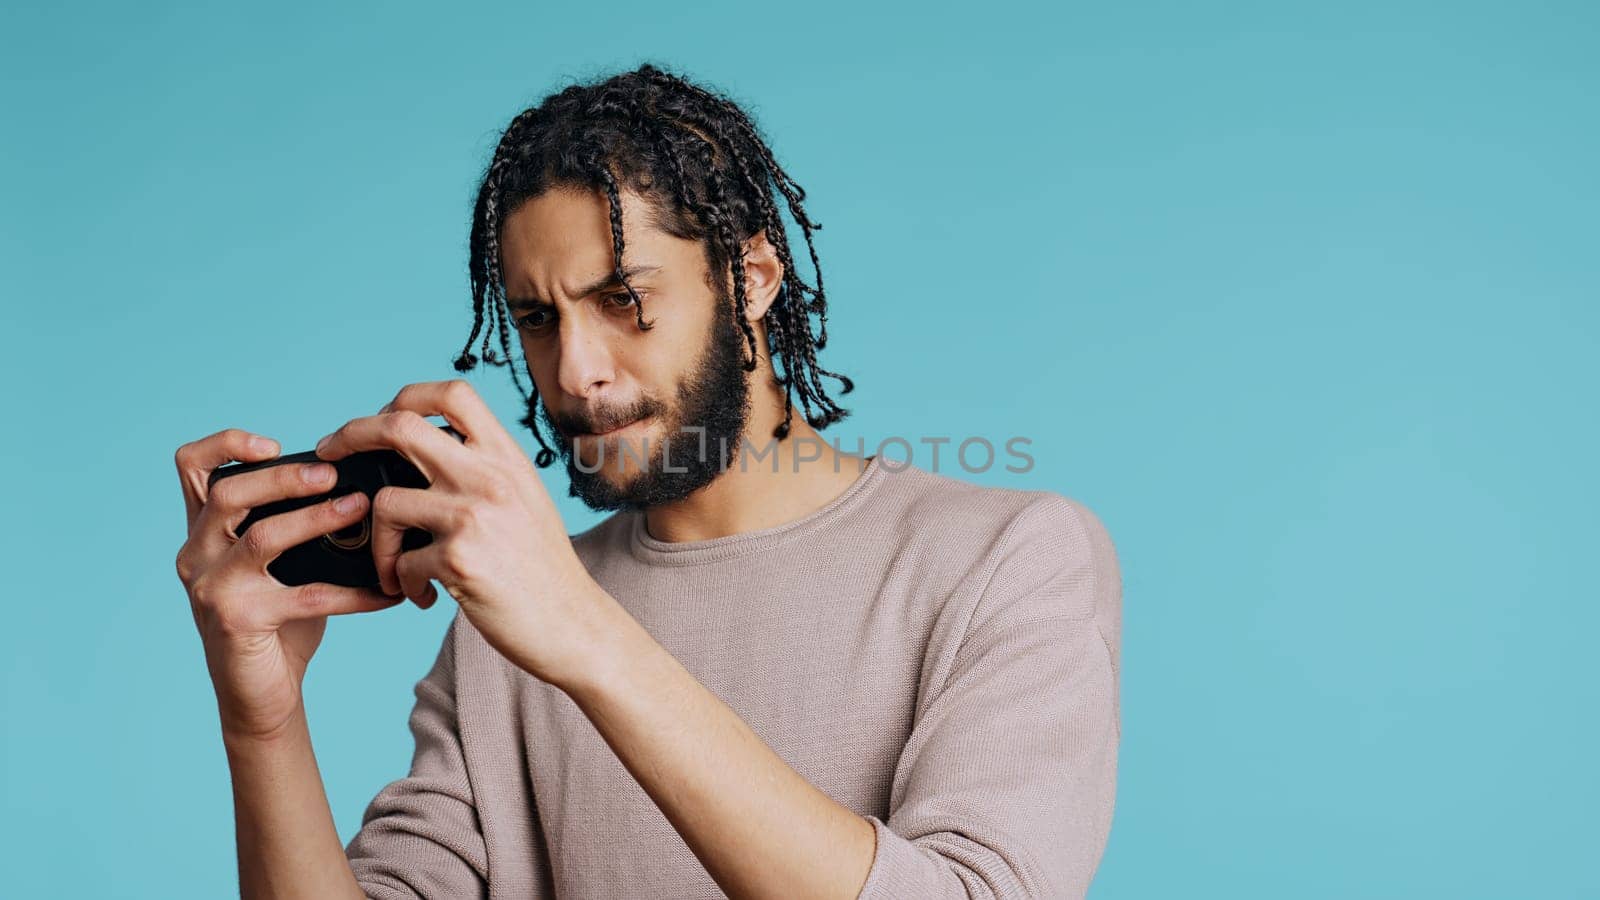 Happy man with disability in wheelchair playing videogames on cellphone, celebrating victory. Cheerful gamer enjoying game on phone, excited about win, studio background, camera B